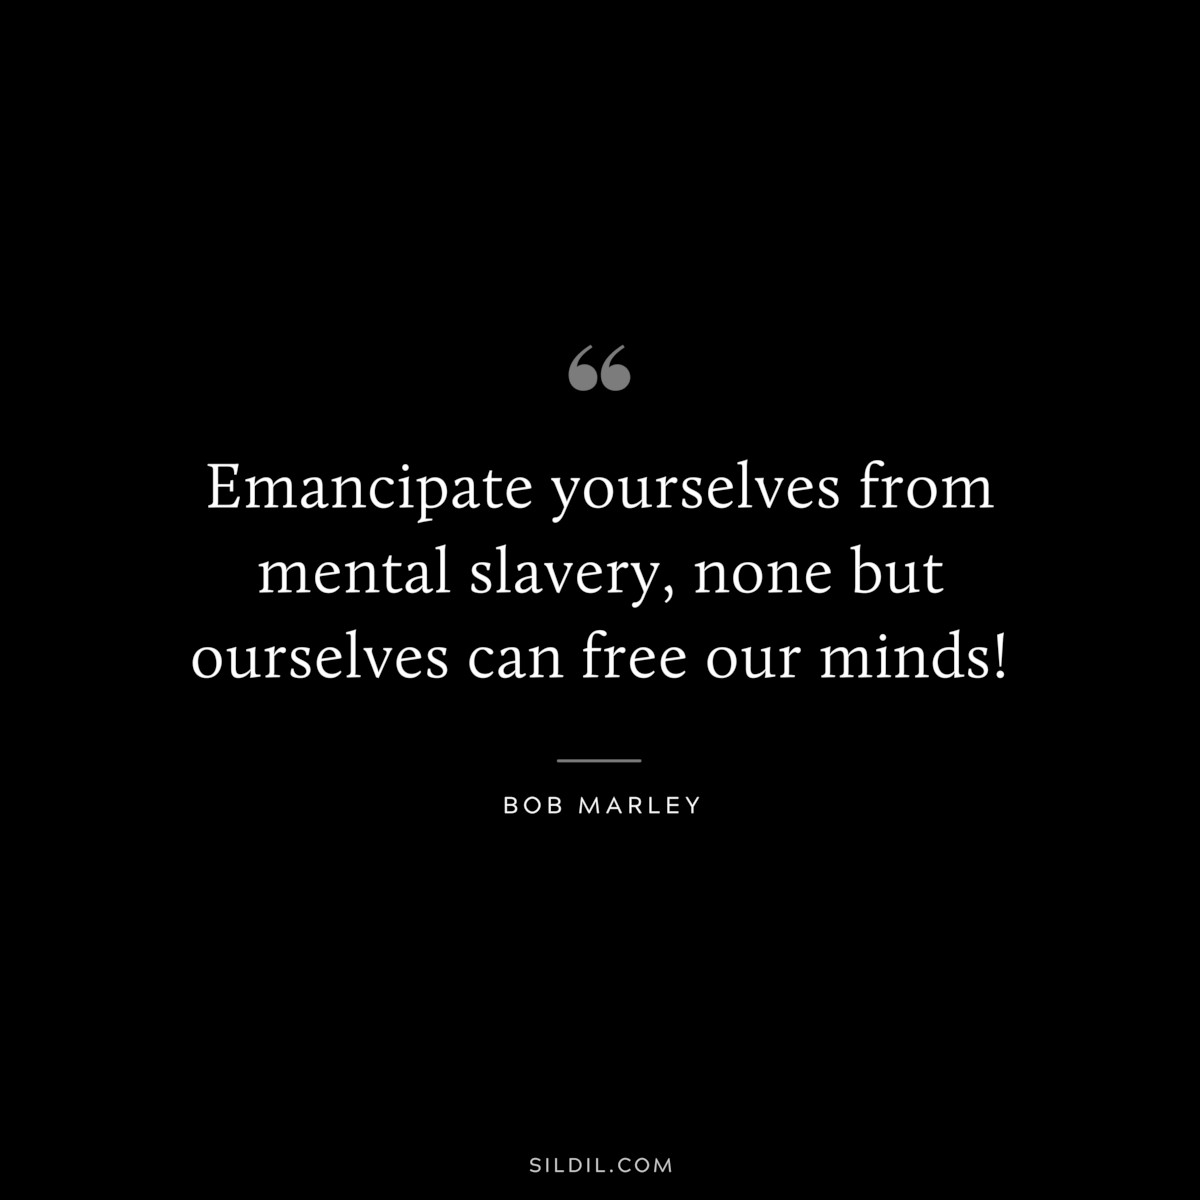 Emancipate yourselves from mental slavery, none but ourselves can free our minds! ― Bob Marley